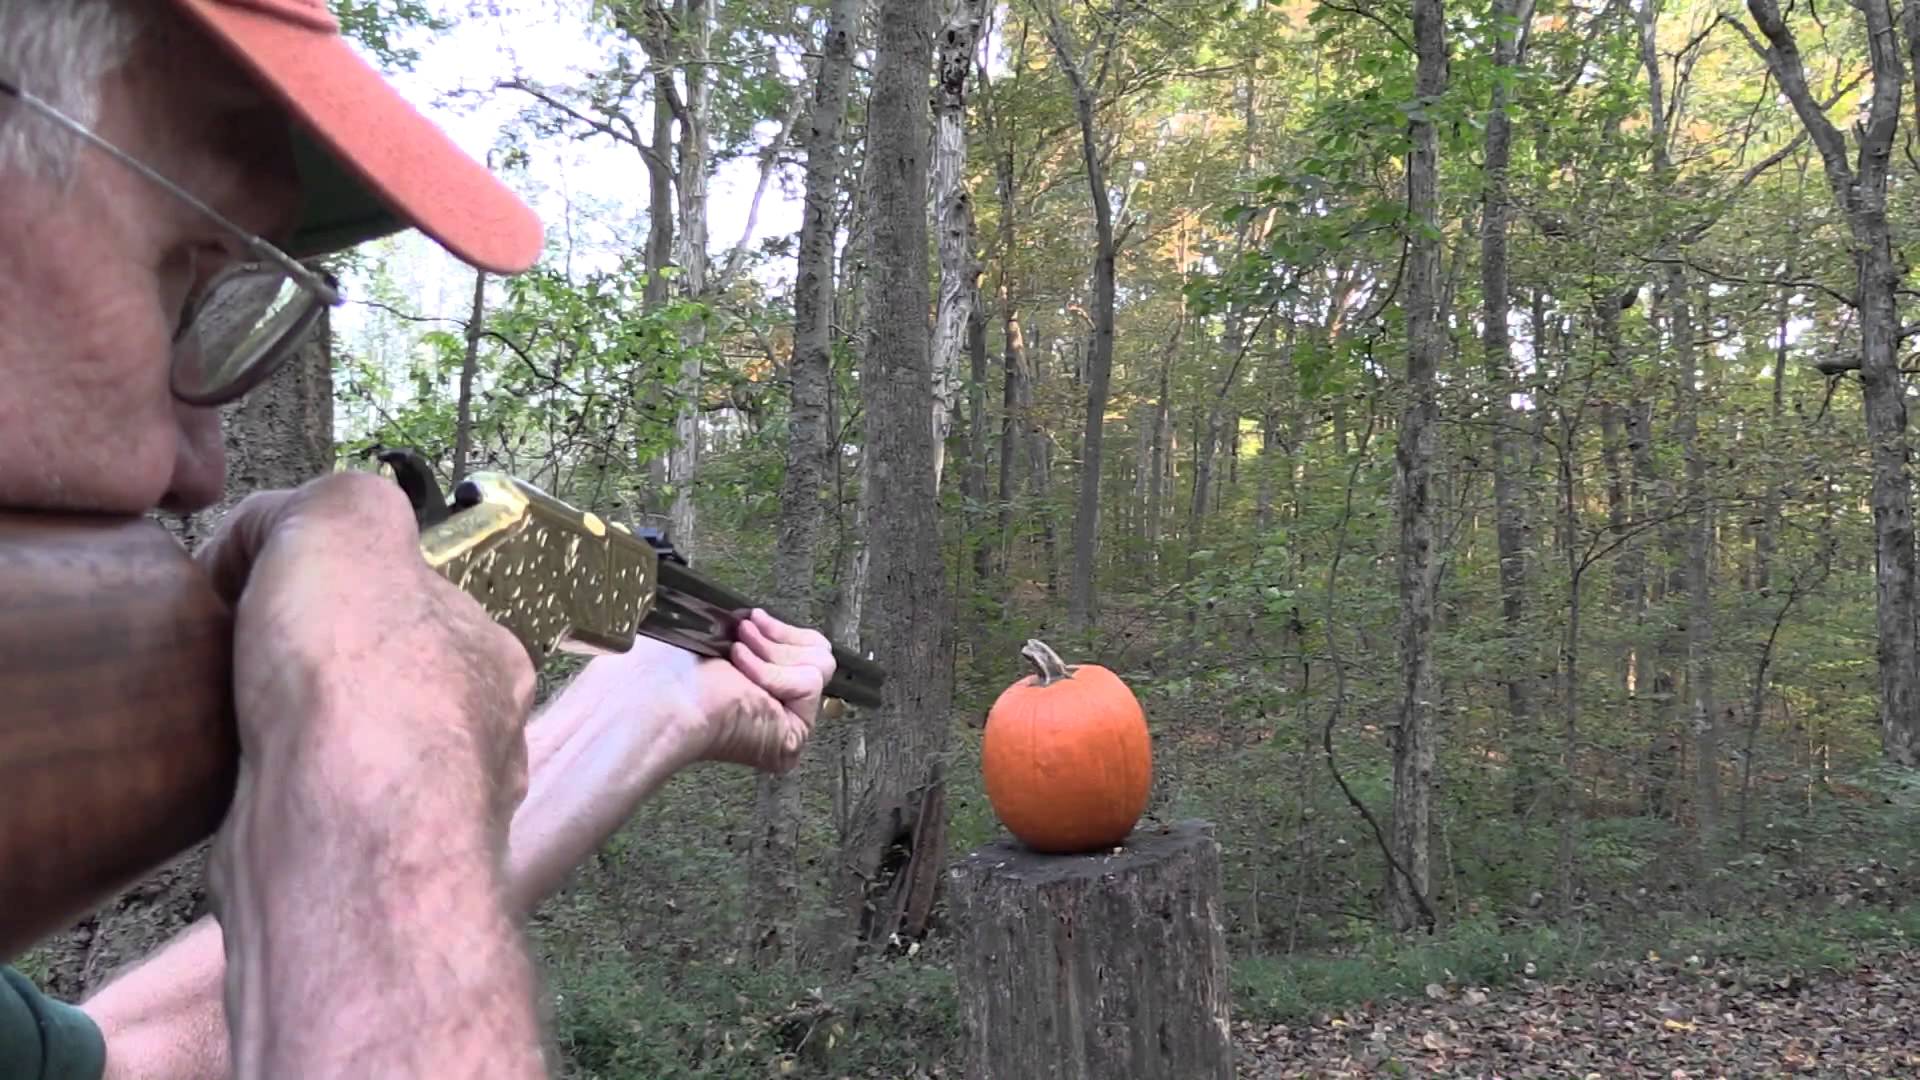 Pumpkin carving with a rifle